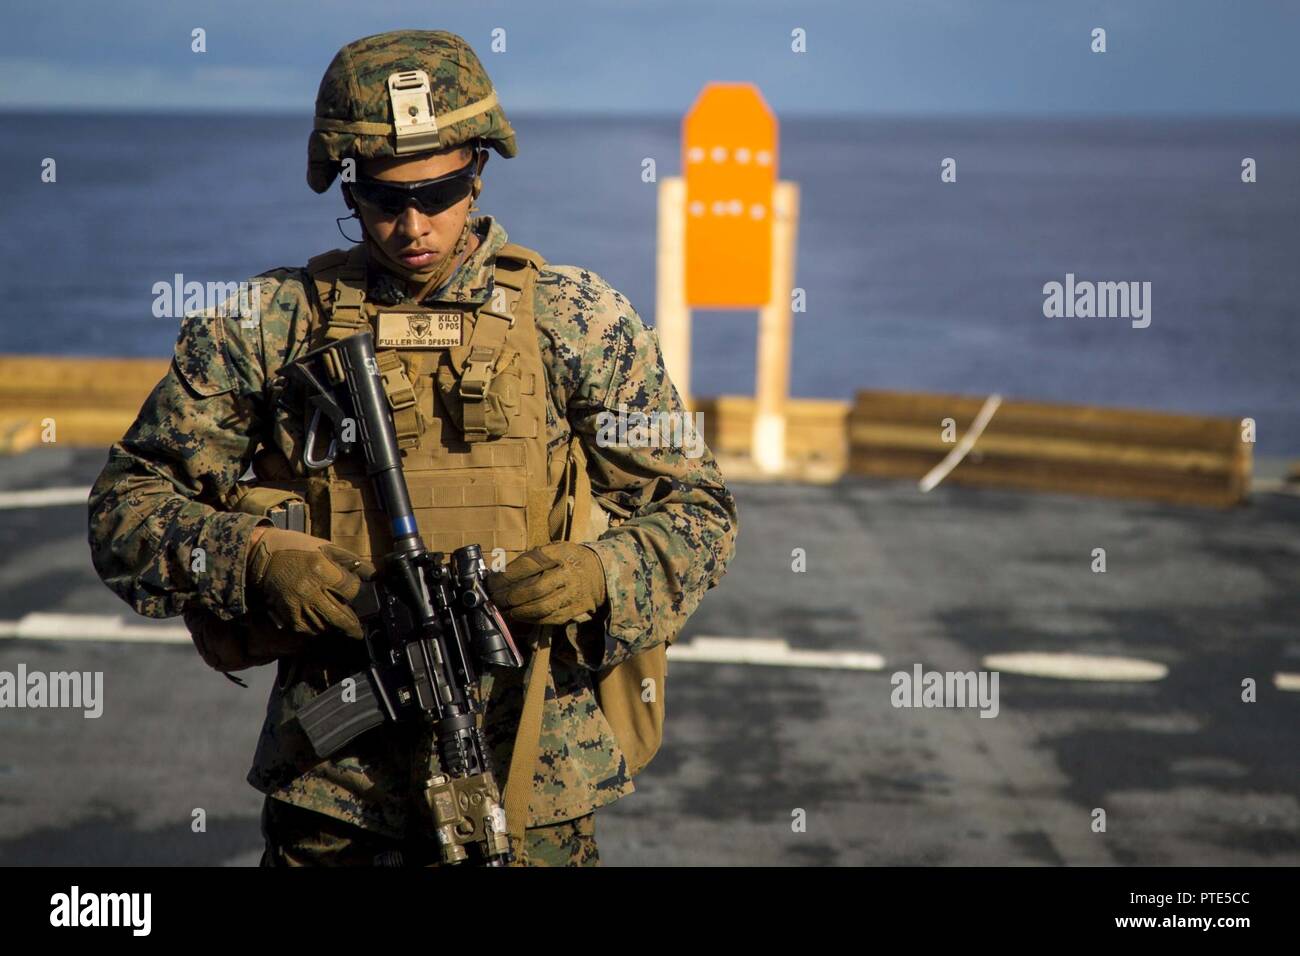 U.S. Marine Corps Lance Cpl. Daniel Fuller, an infantryman with Task Force Koa Moana 17, walks up range after analyzing his shot group during a live fire range aboard the USNS Sacagawea, July 13, 2017. Koa Moana 17 is designed to improve interoperability with our partners, enhance military-to-military relations, and expose the Marine Corps forces to different types of terrain for familiarity in the event of a natural disaster in the region. Stock Photo